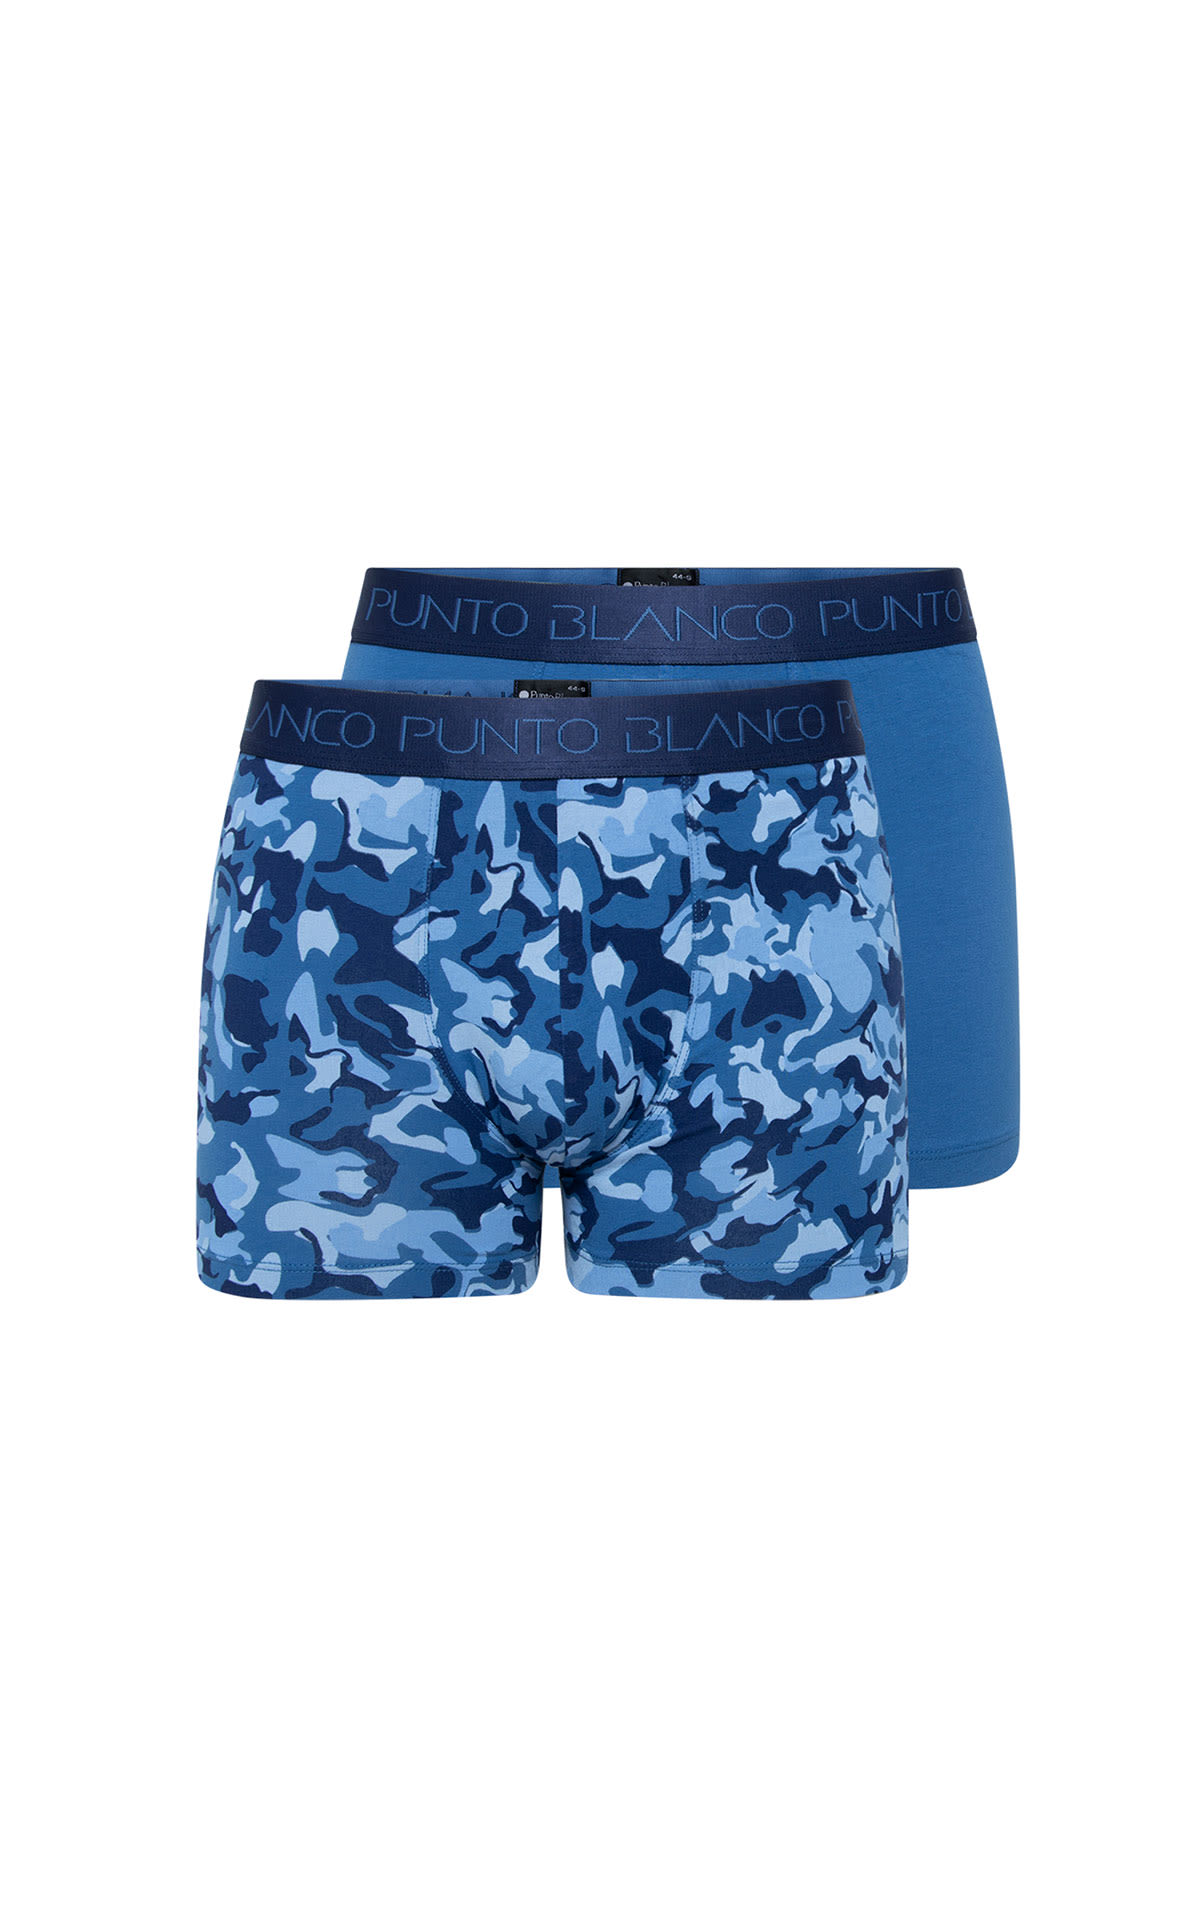 Pack of blue boxer briefs 